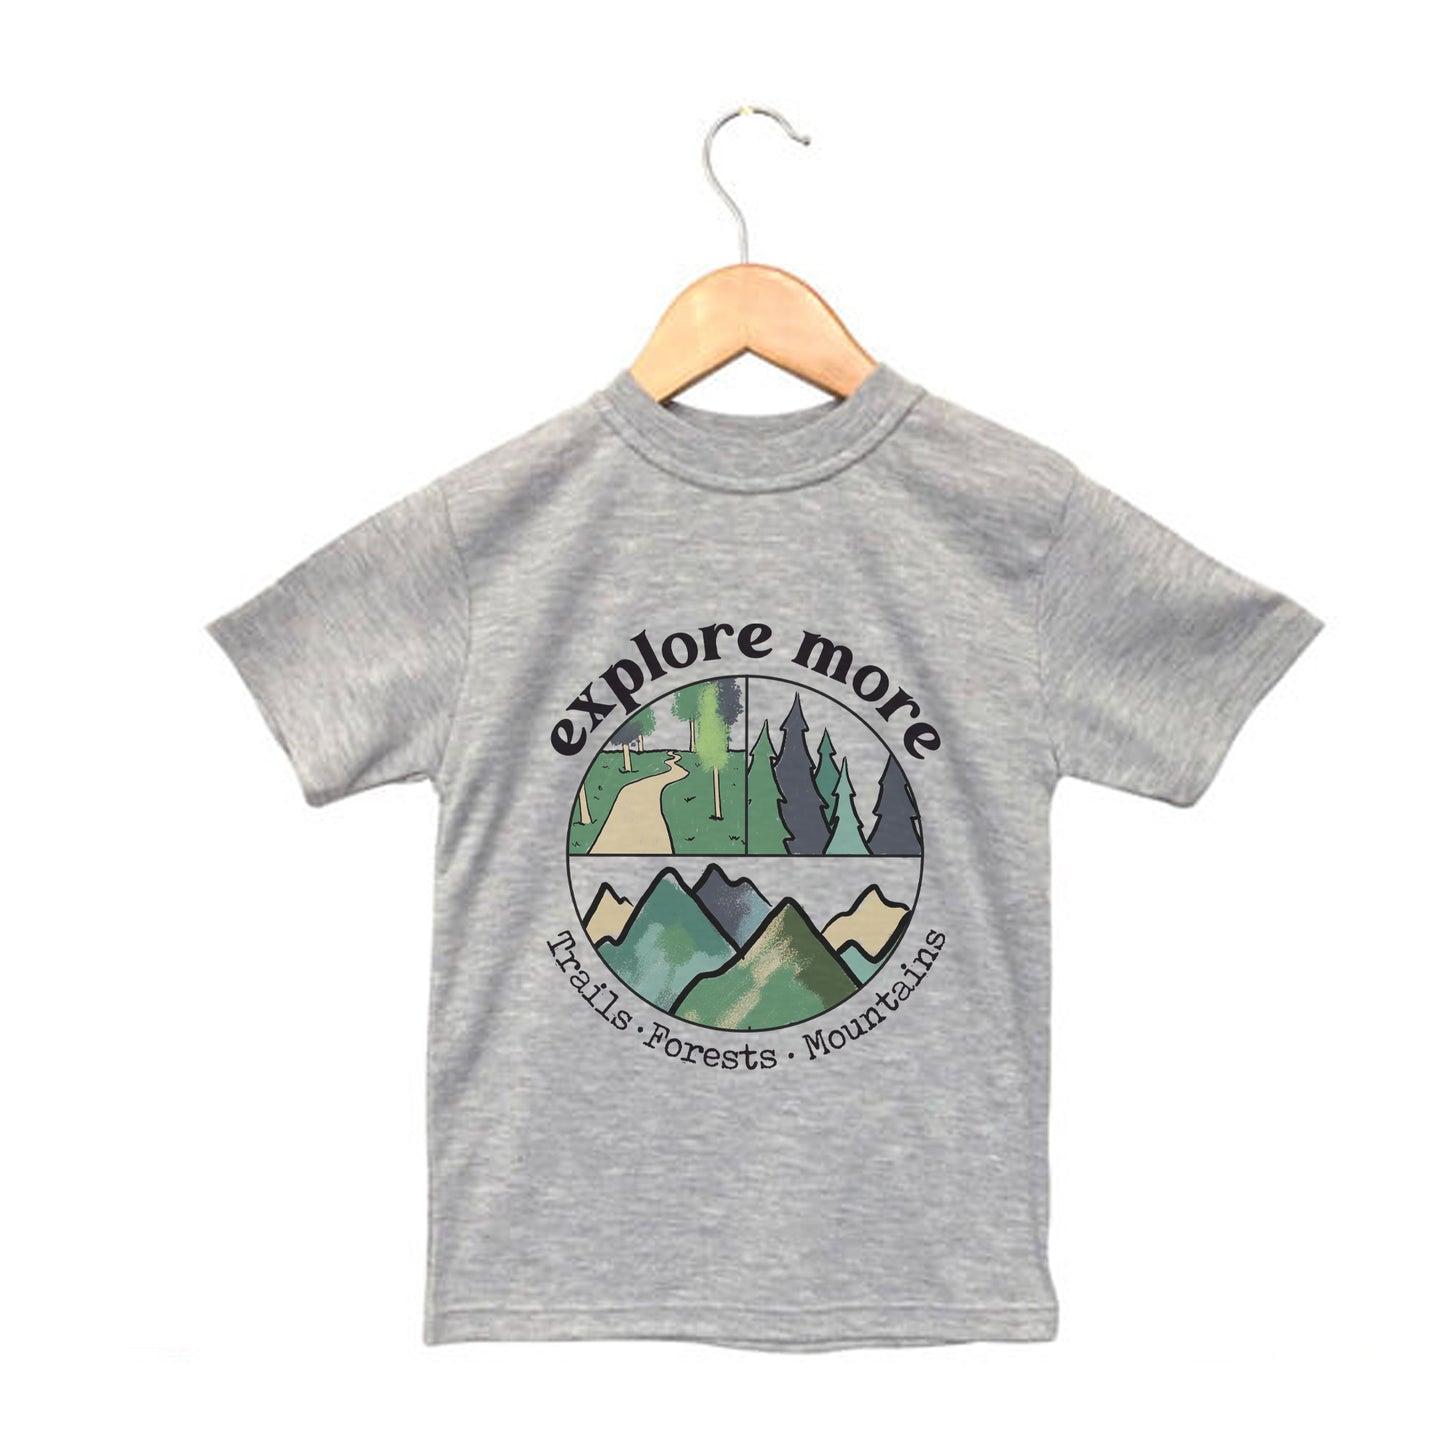 "Explore more" Grey Toddler/Youth Tee